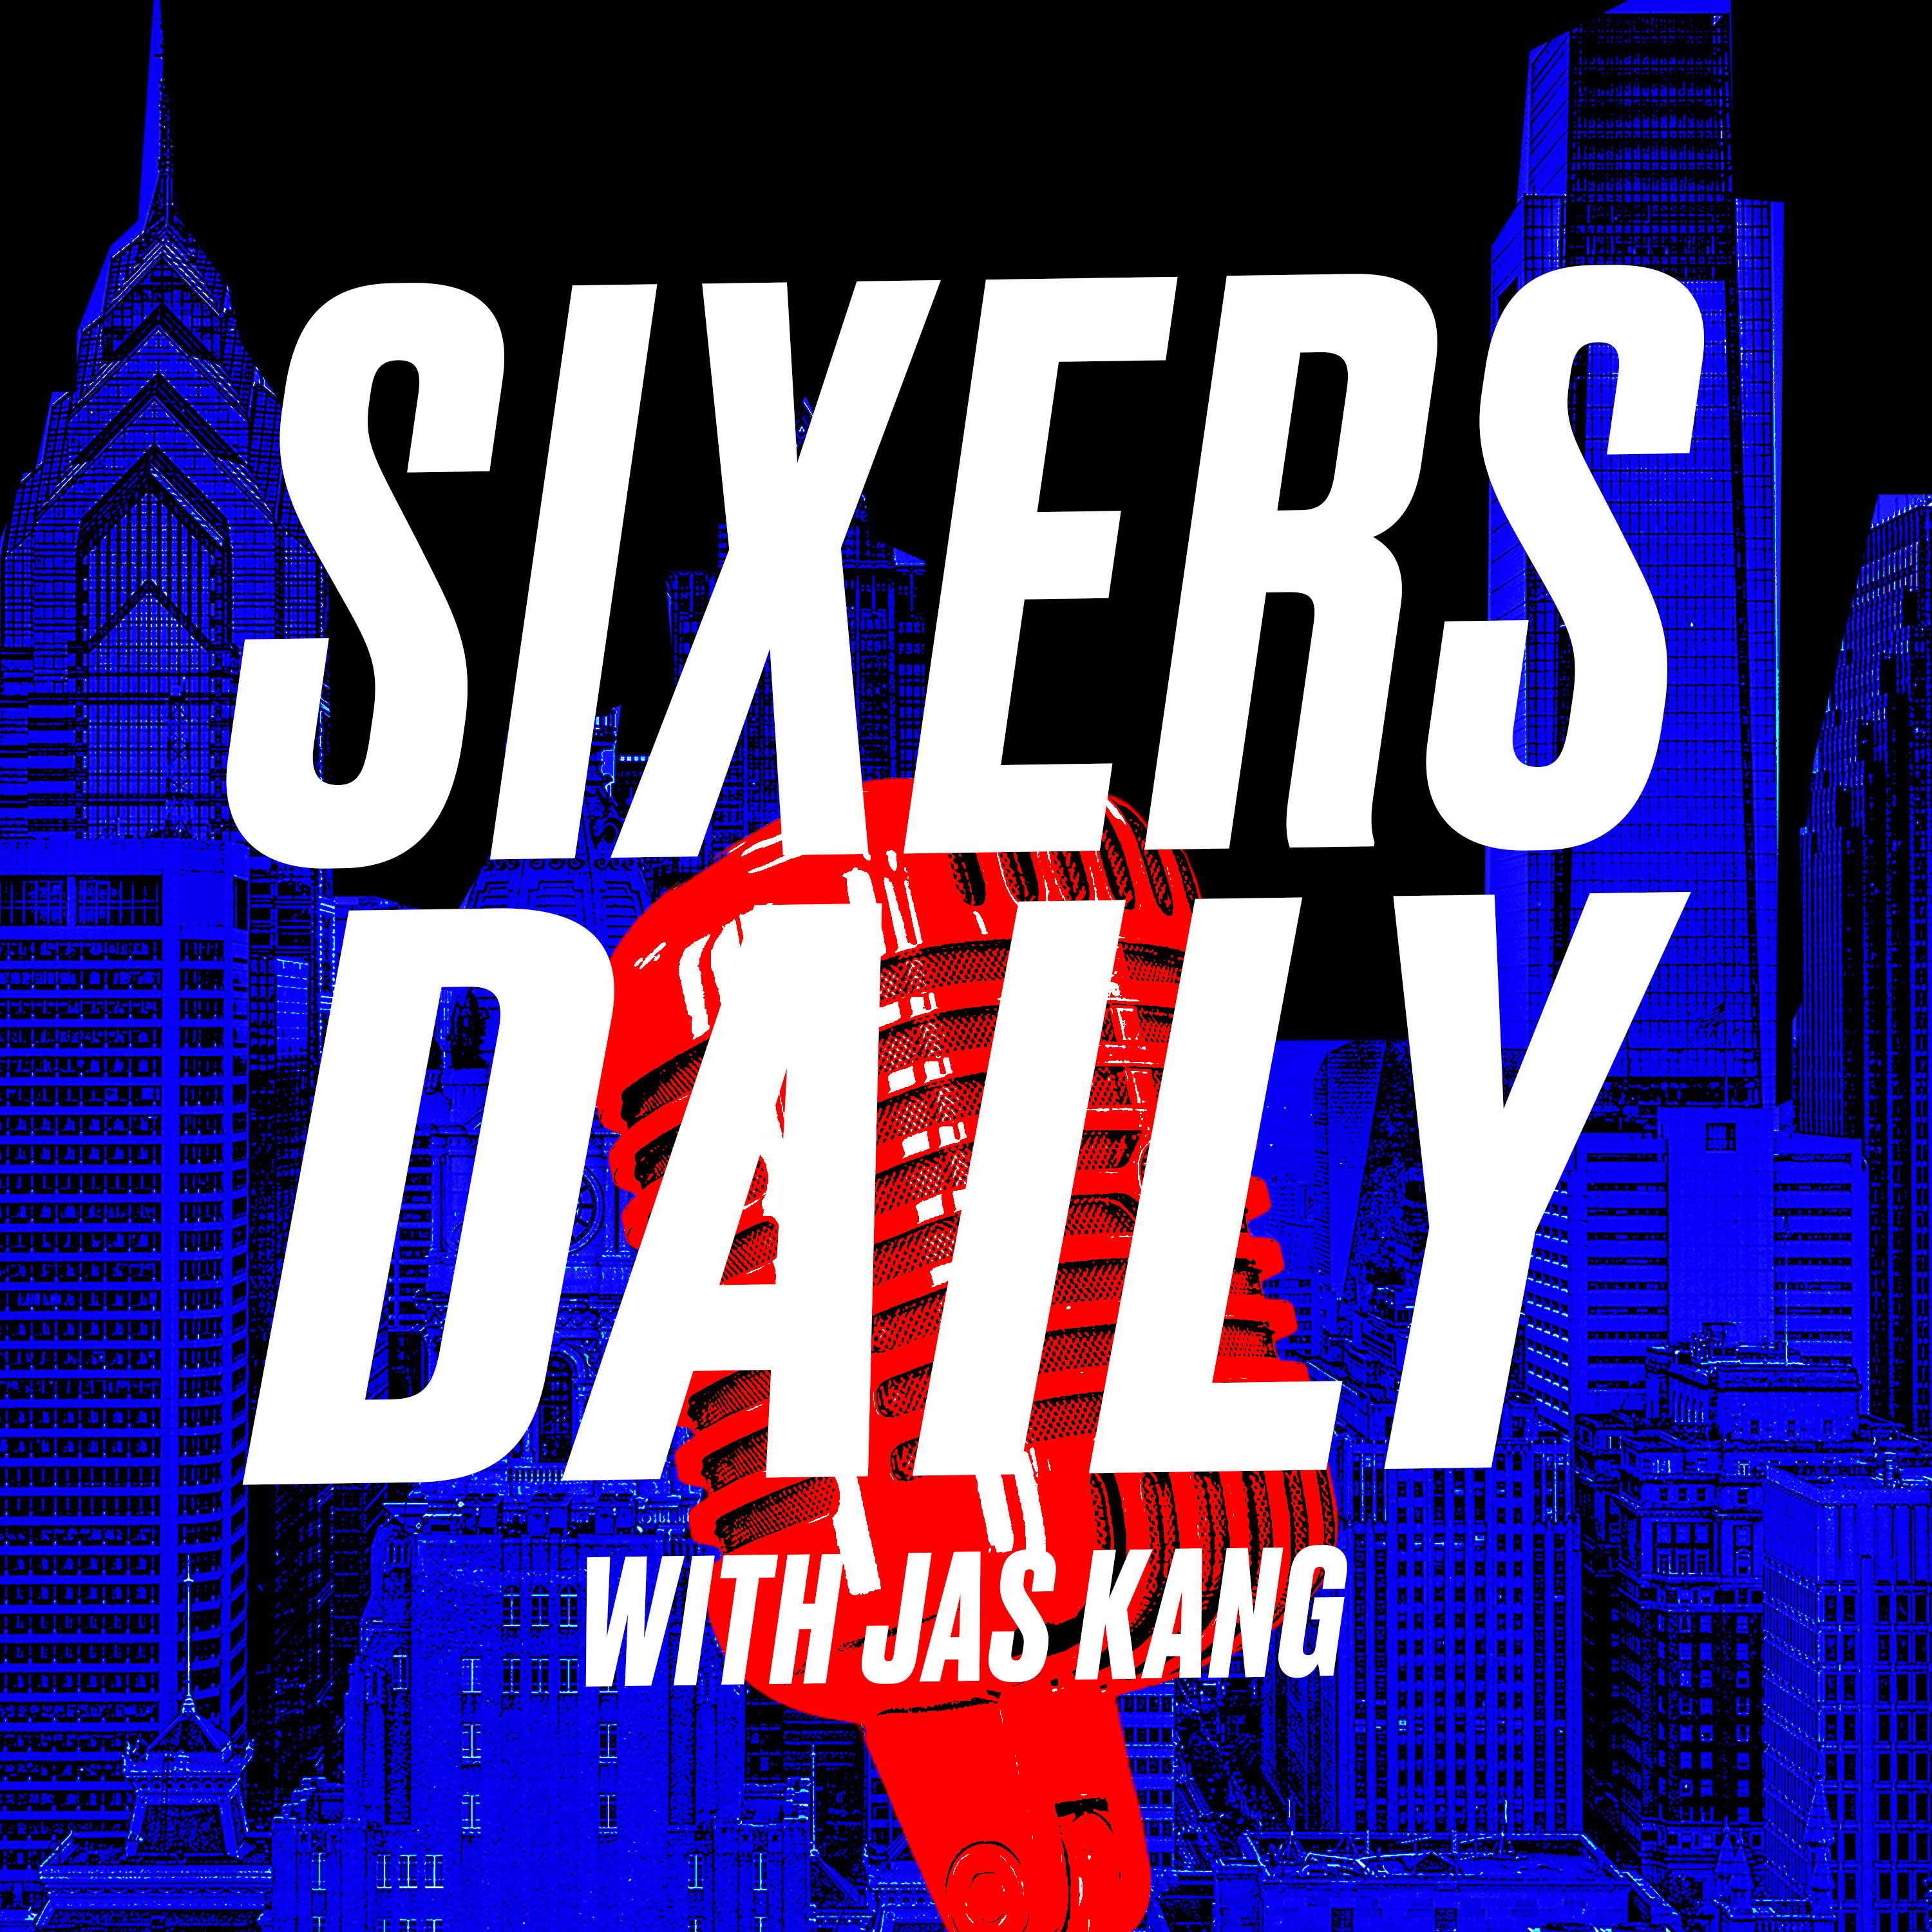 Sixers Daily with Jas Kang - The Sixers finish the preseason 4-0, James Harden looks different, Montrezl Harrell or Paul Reed? Plus, a new wrinkle in Tobias Harris' game. With Jackson Frank.